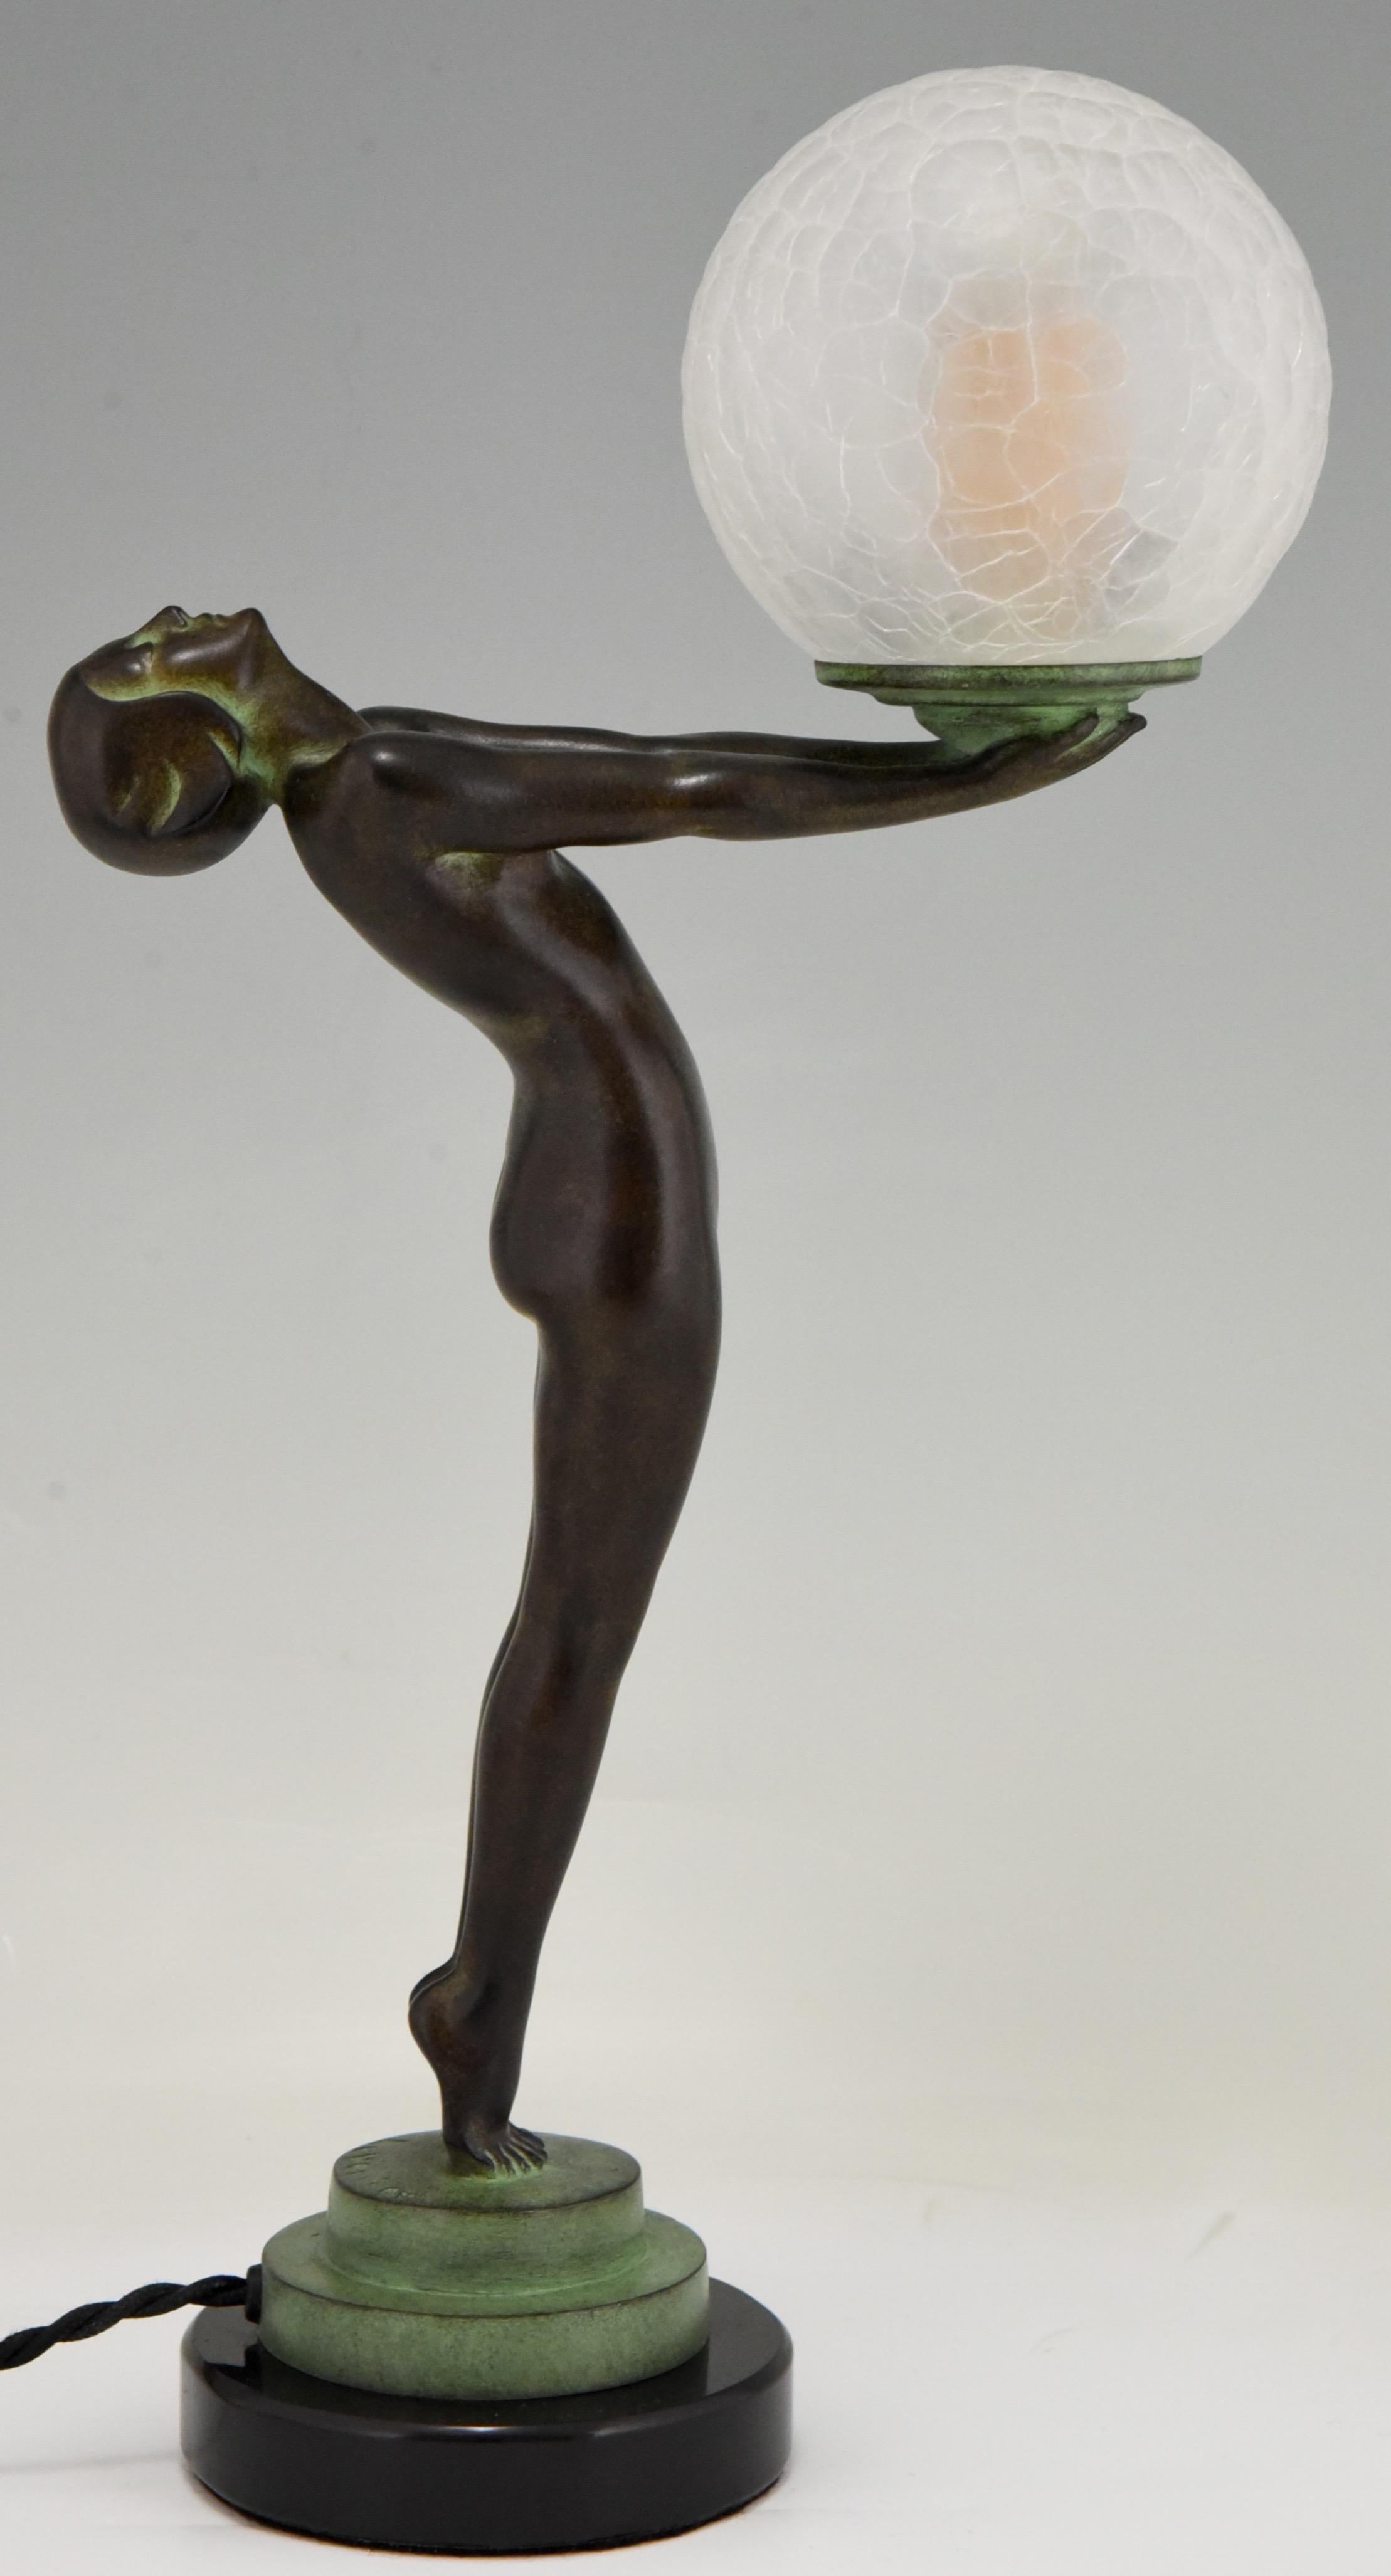 Contemporary Pair of Art Deco Style Lamps Clarté Standing Nude with Globe by Max Le Verrier